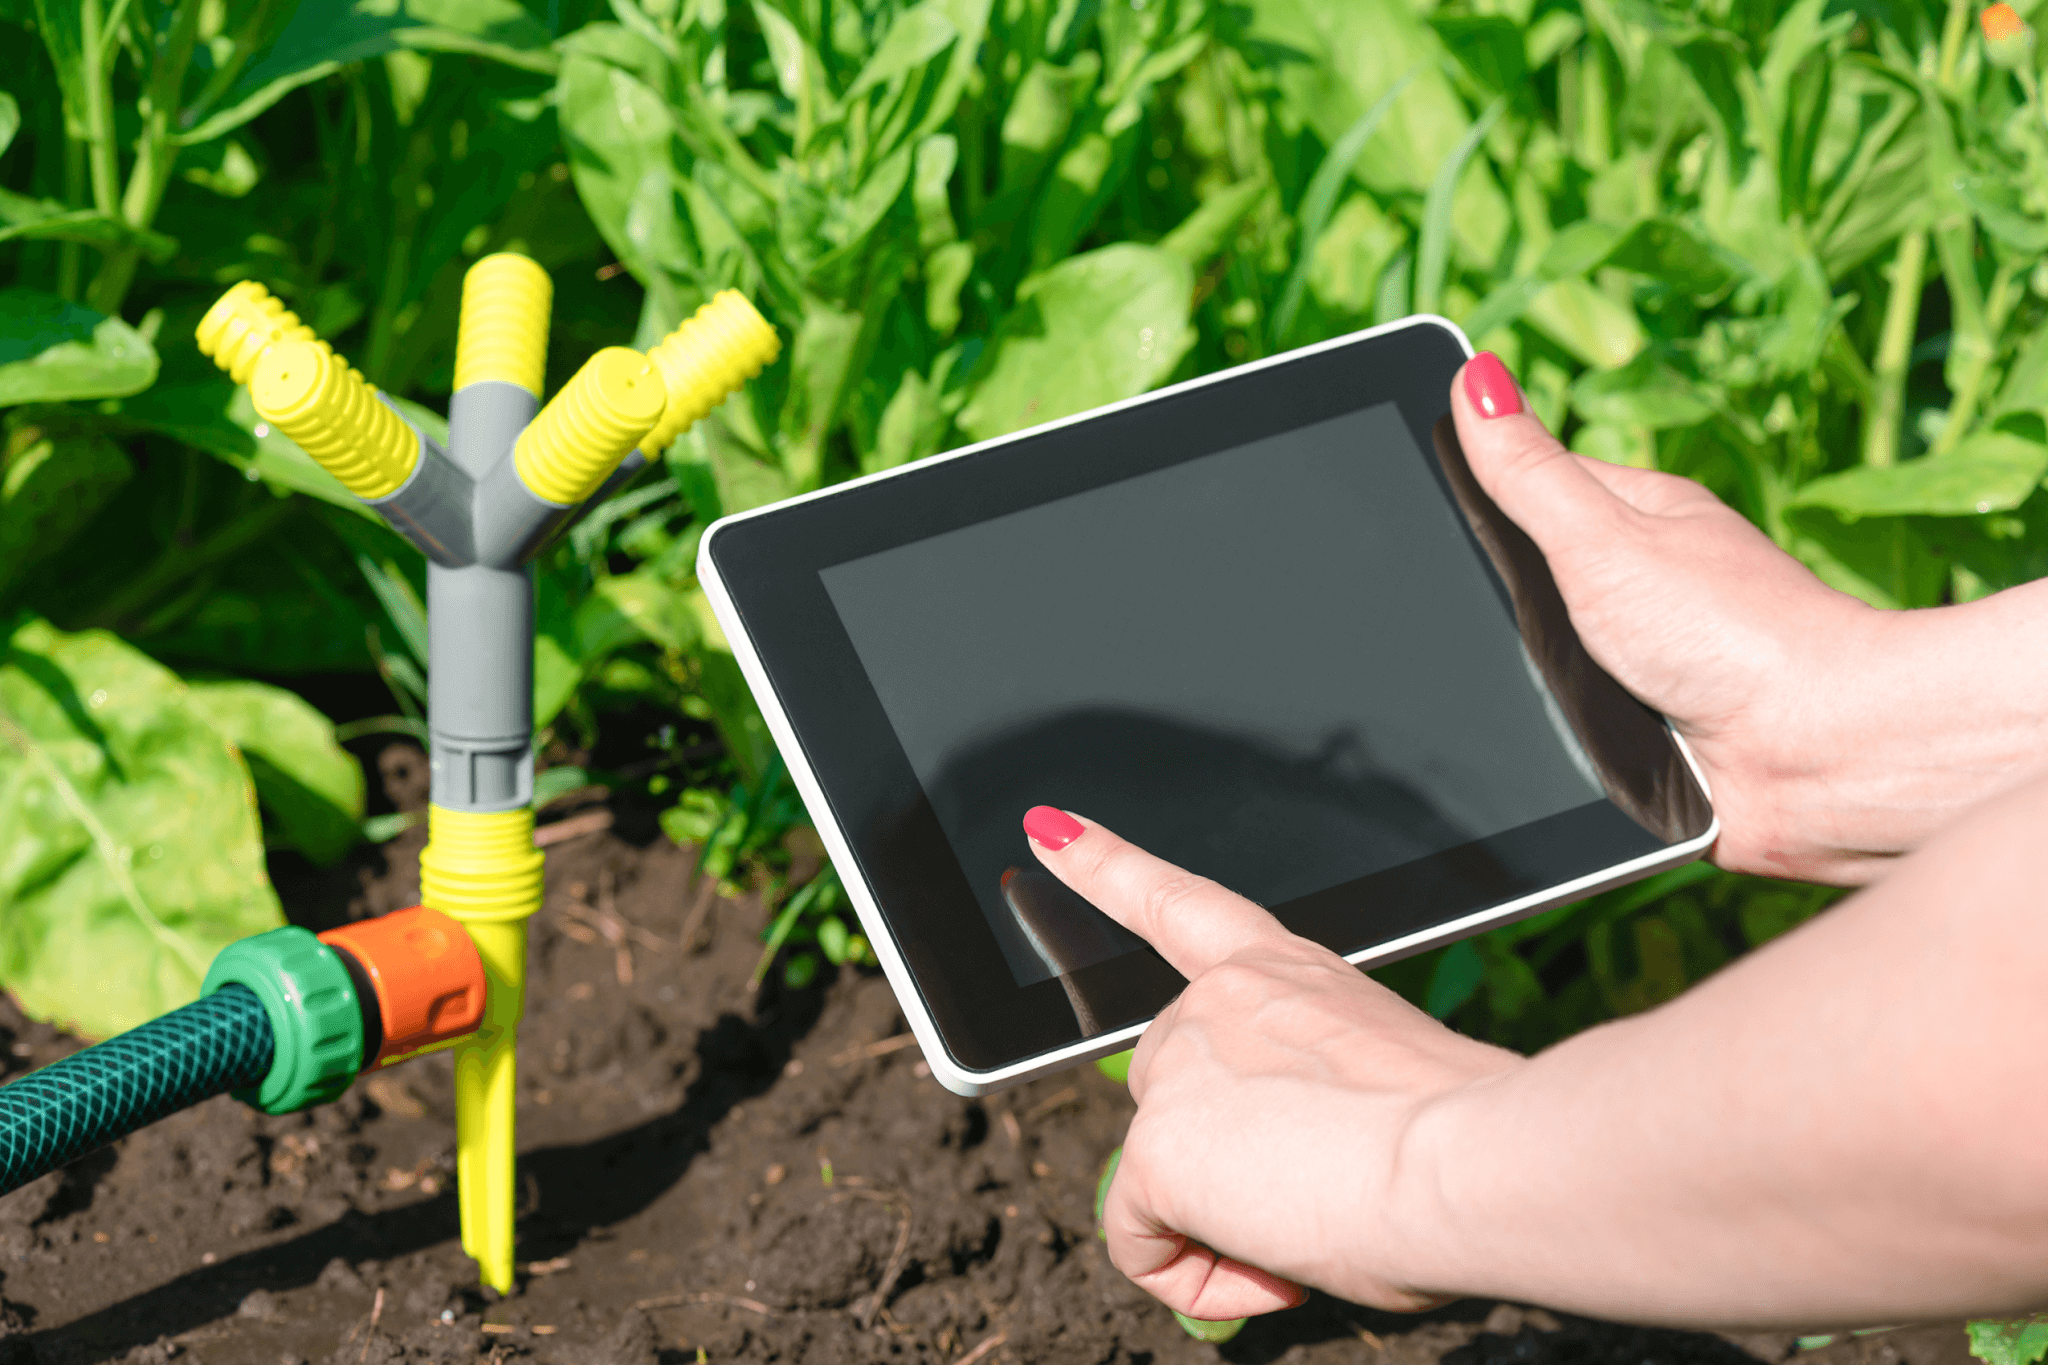 Female utilizing Smart Irrigation Systems, controlling via tablet device